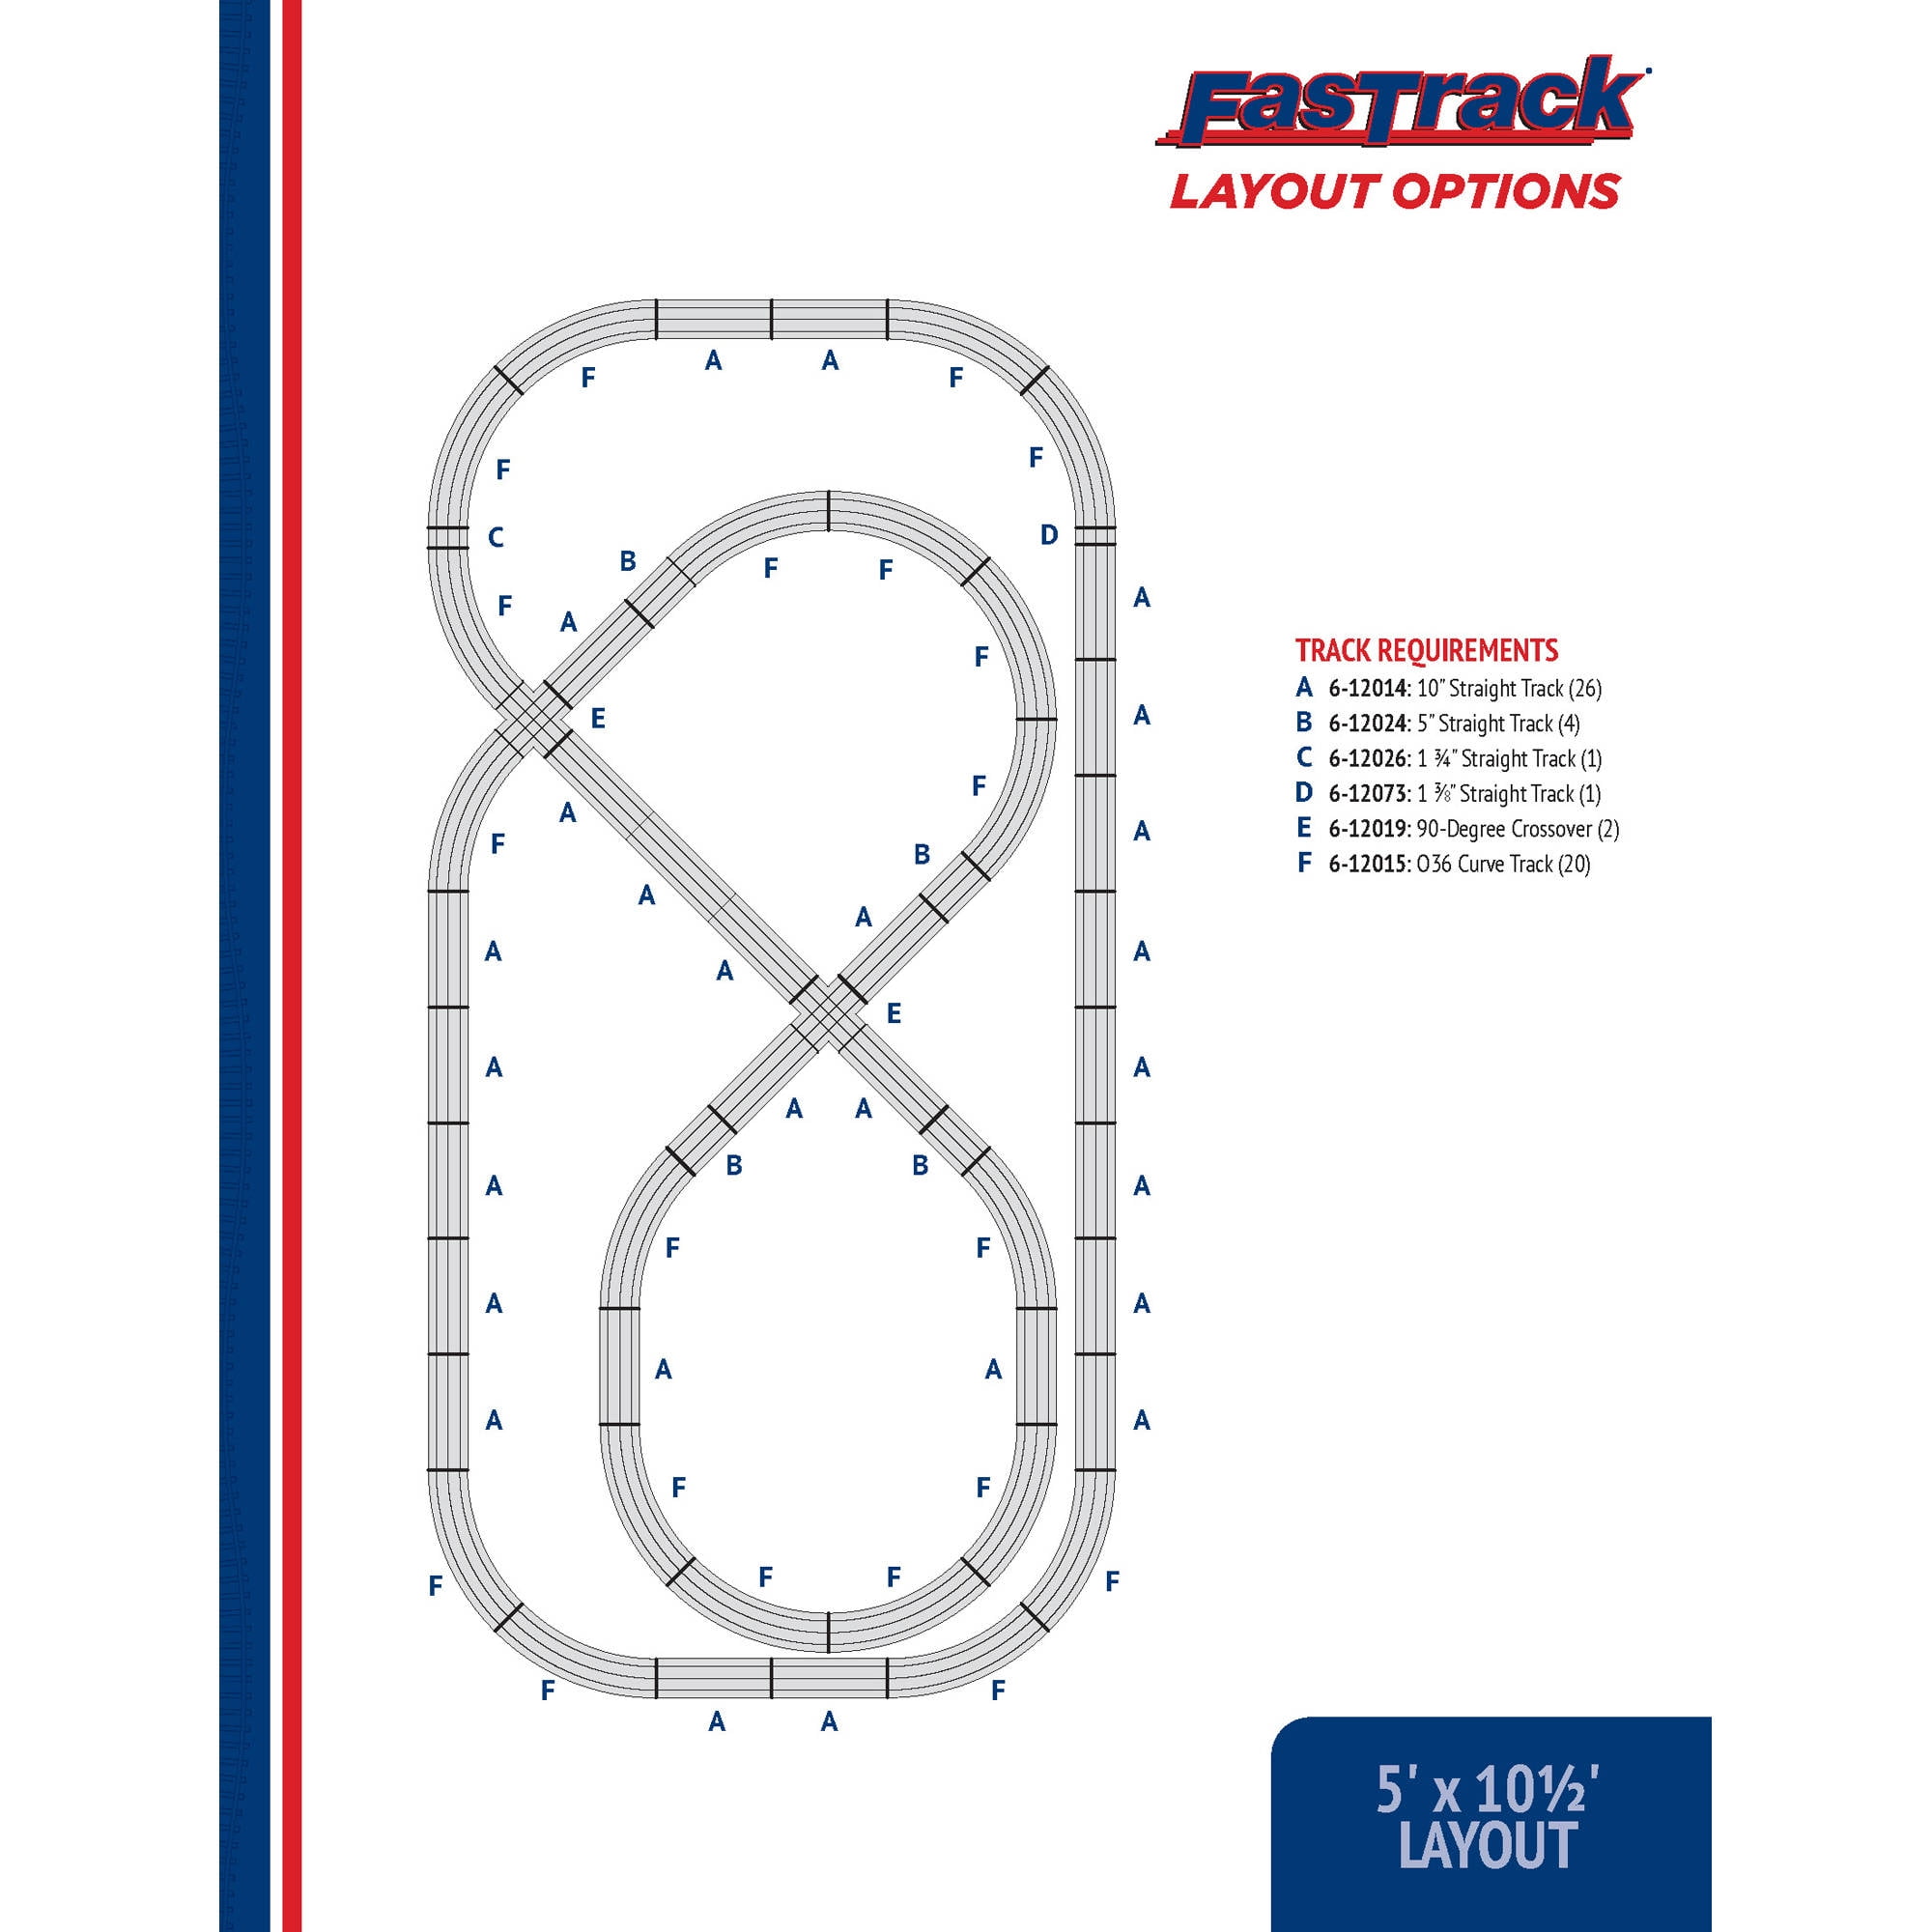 LIONEL 6-12014 10" STRAIGHT FASTRACK FAST TRACK O GAUGE TRAIN LAYOUT LOT 10 NEW 